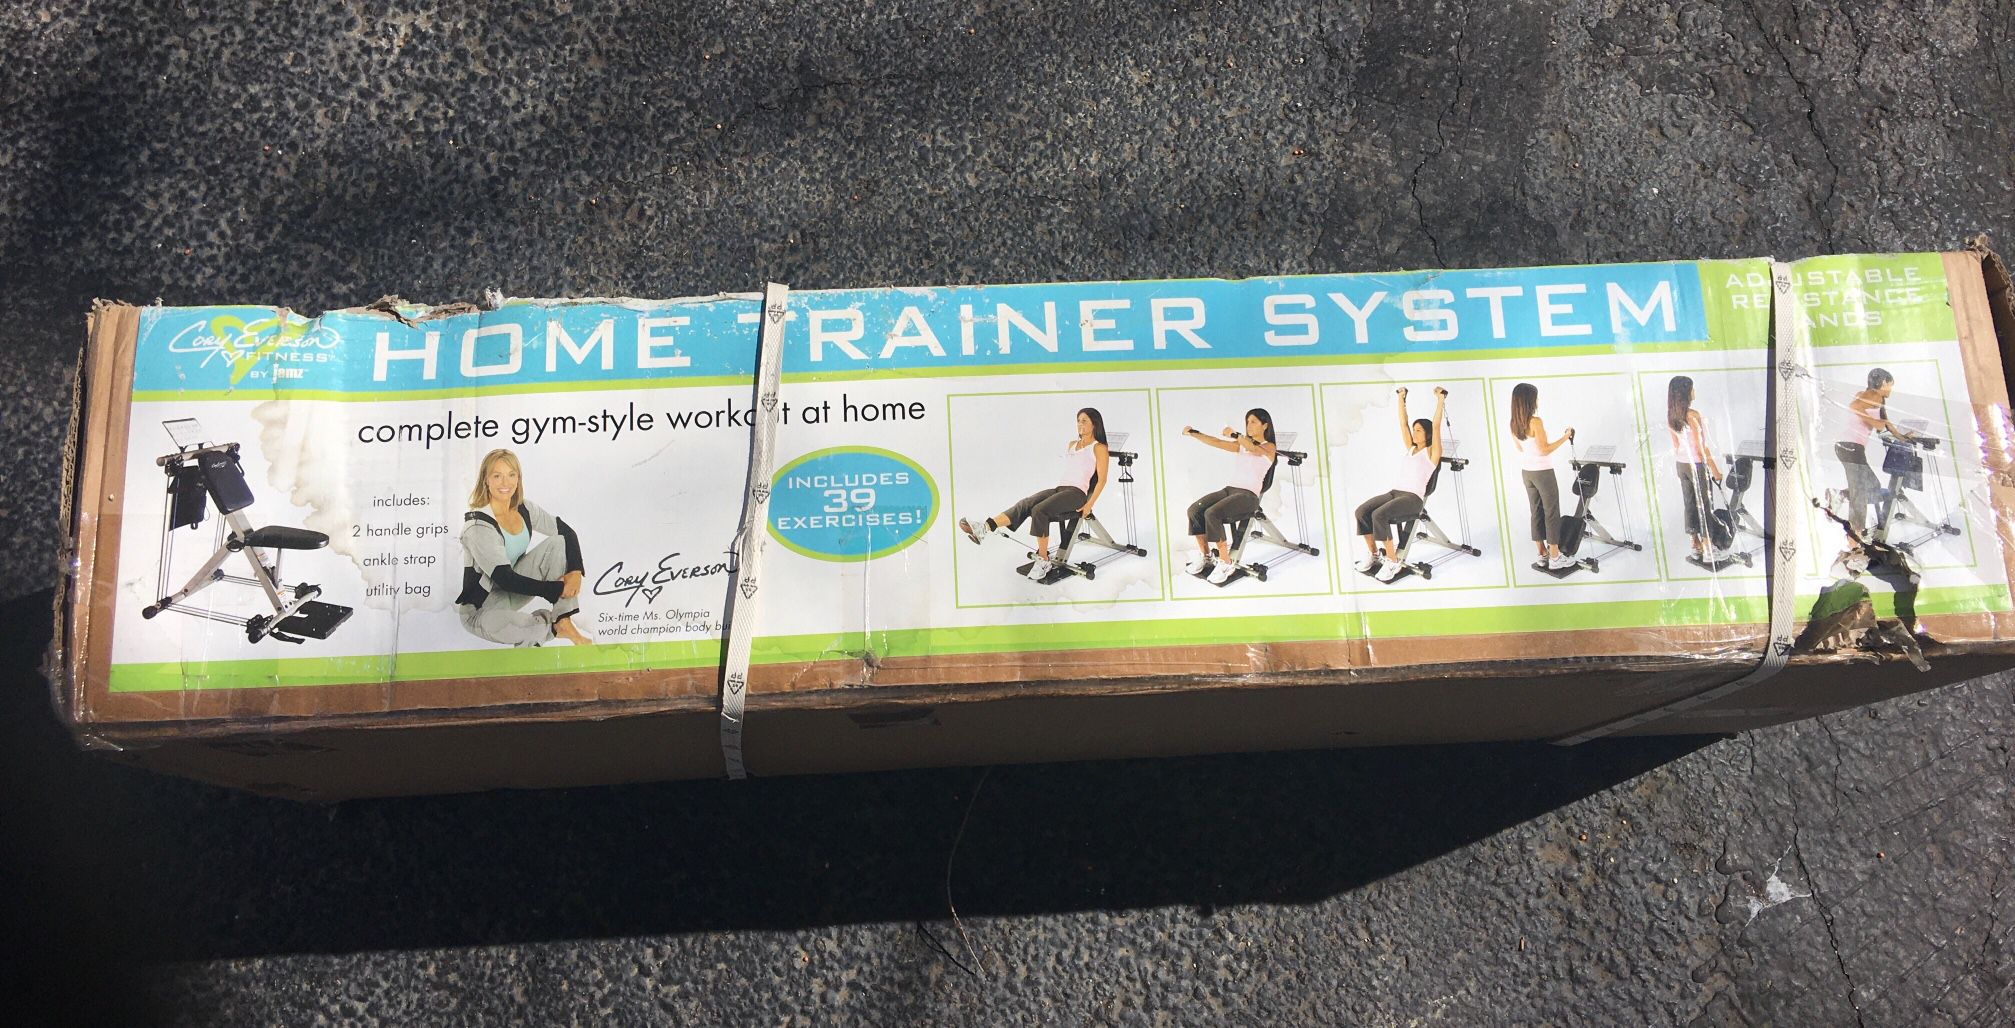 Home Trainer System